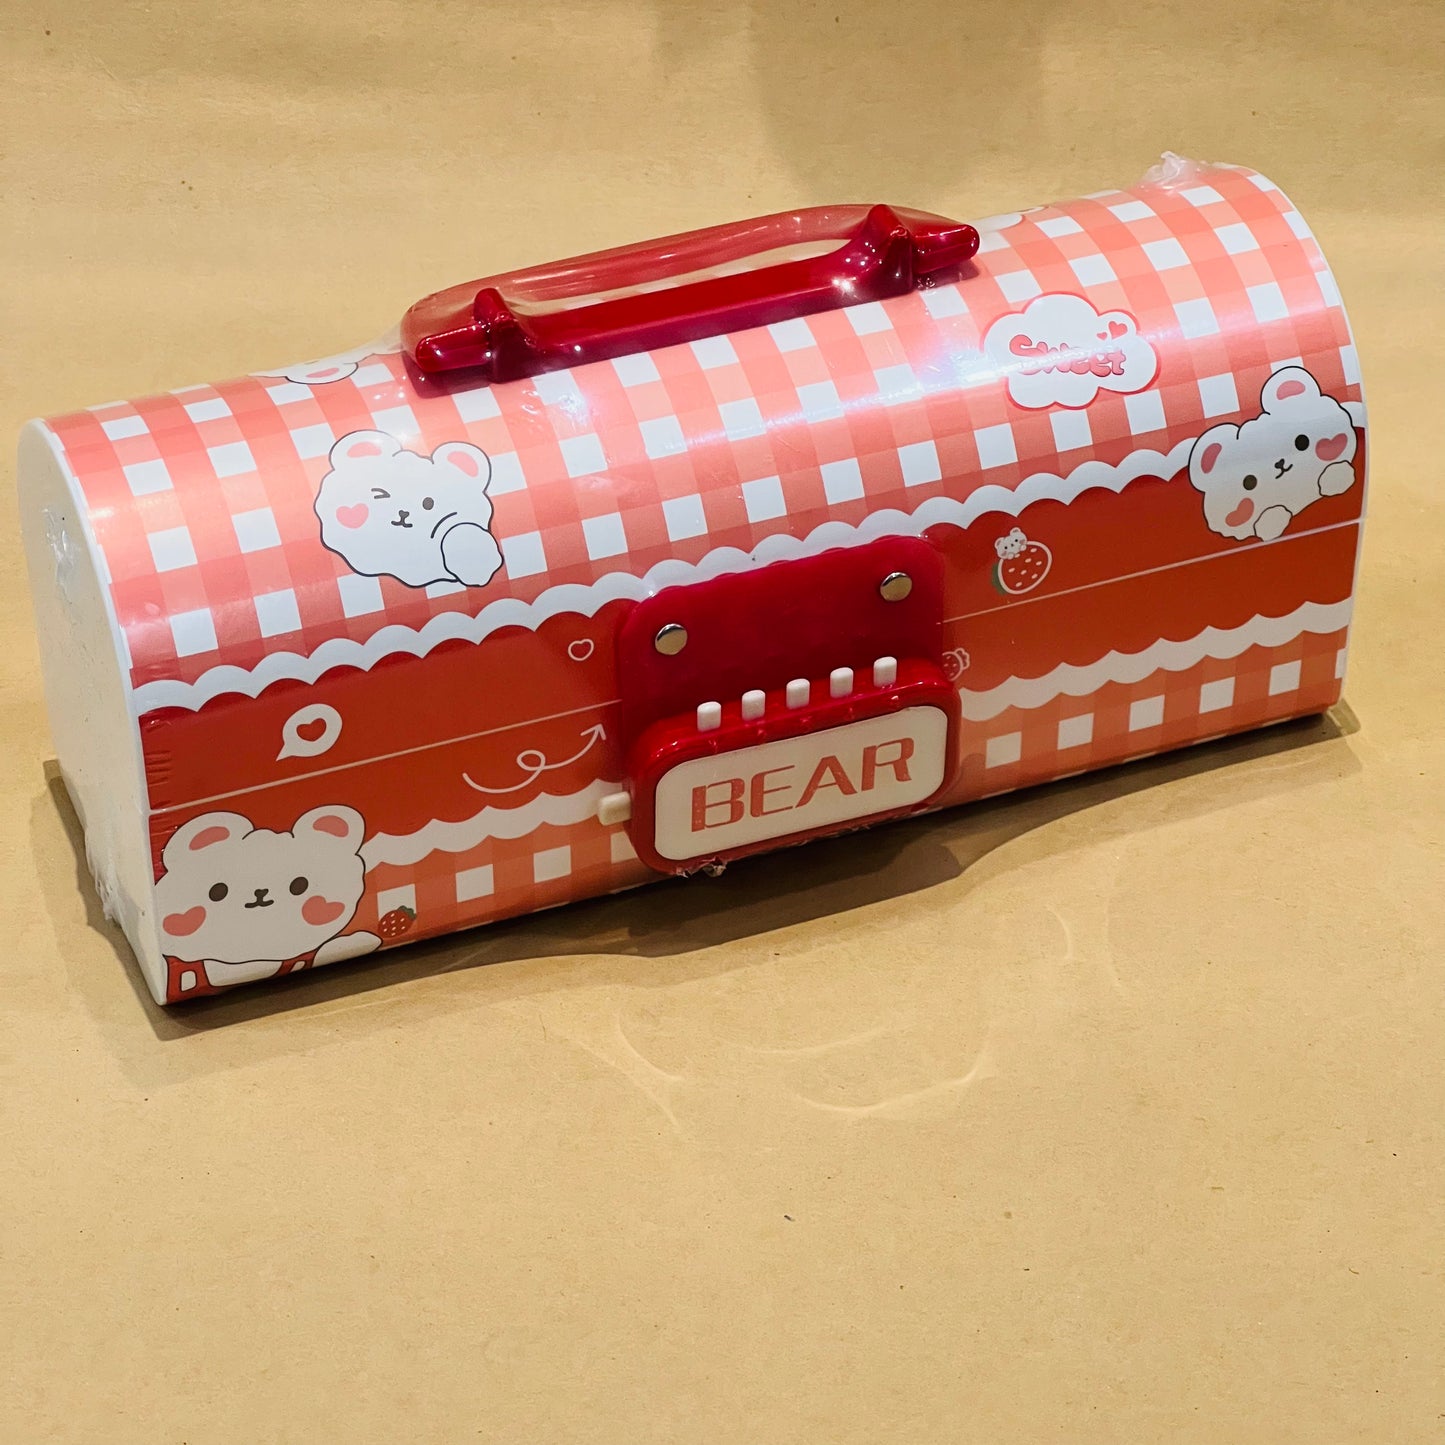 Cute Pencil case with passcodes